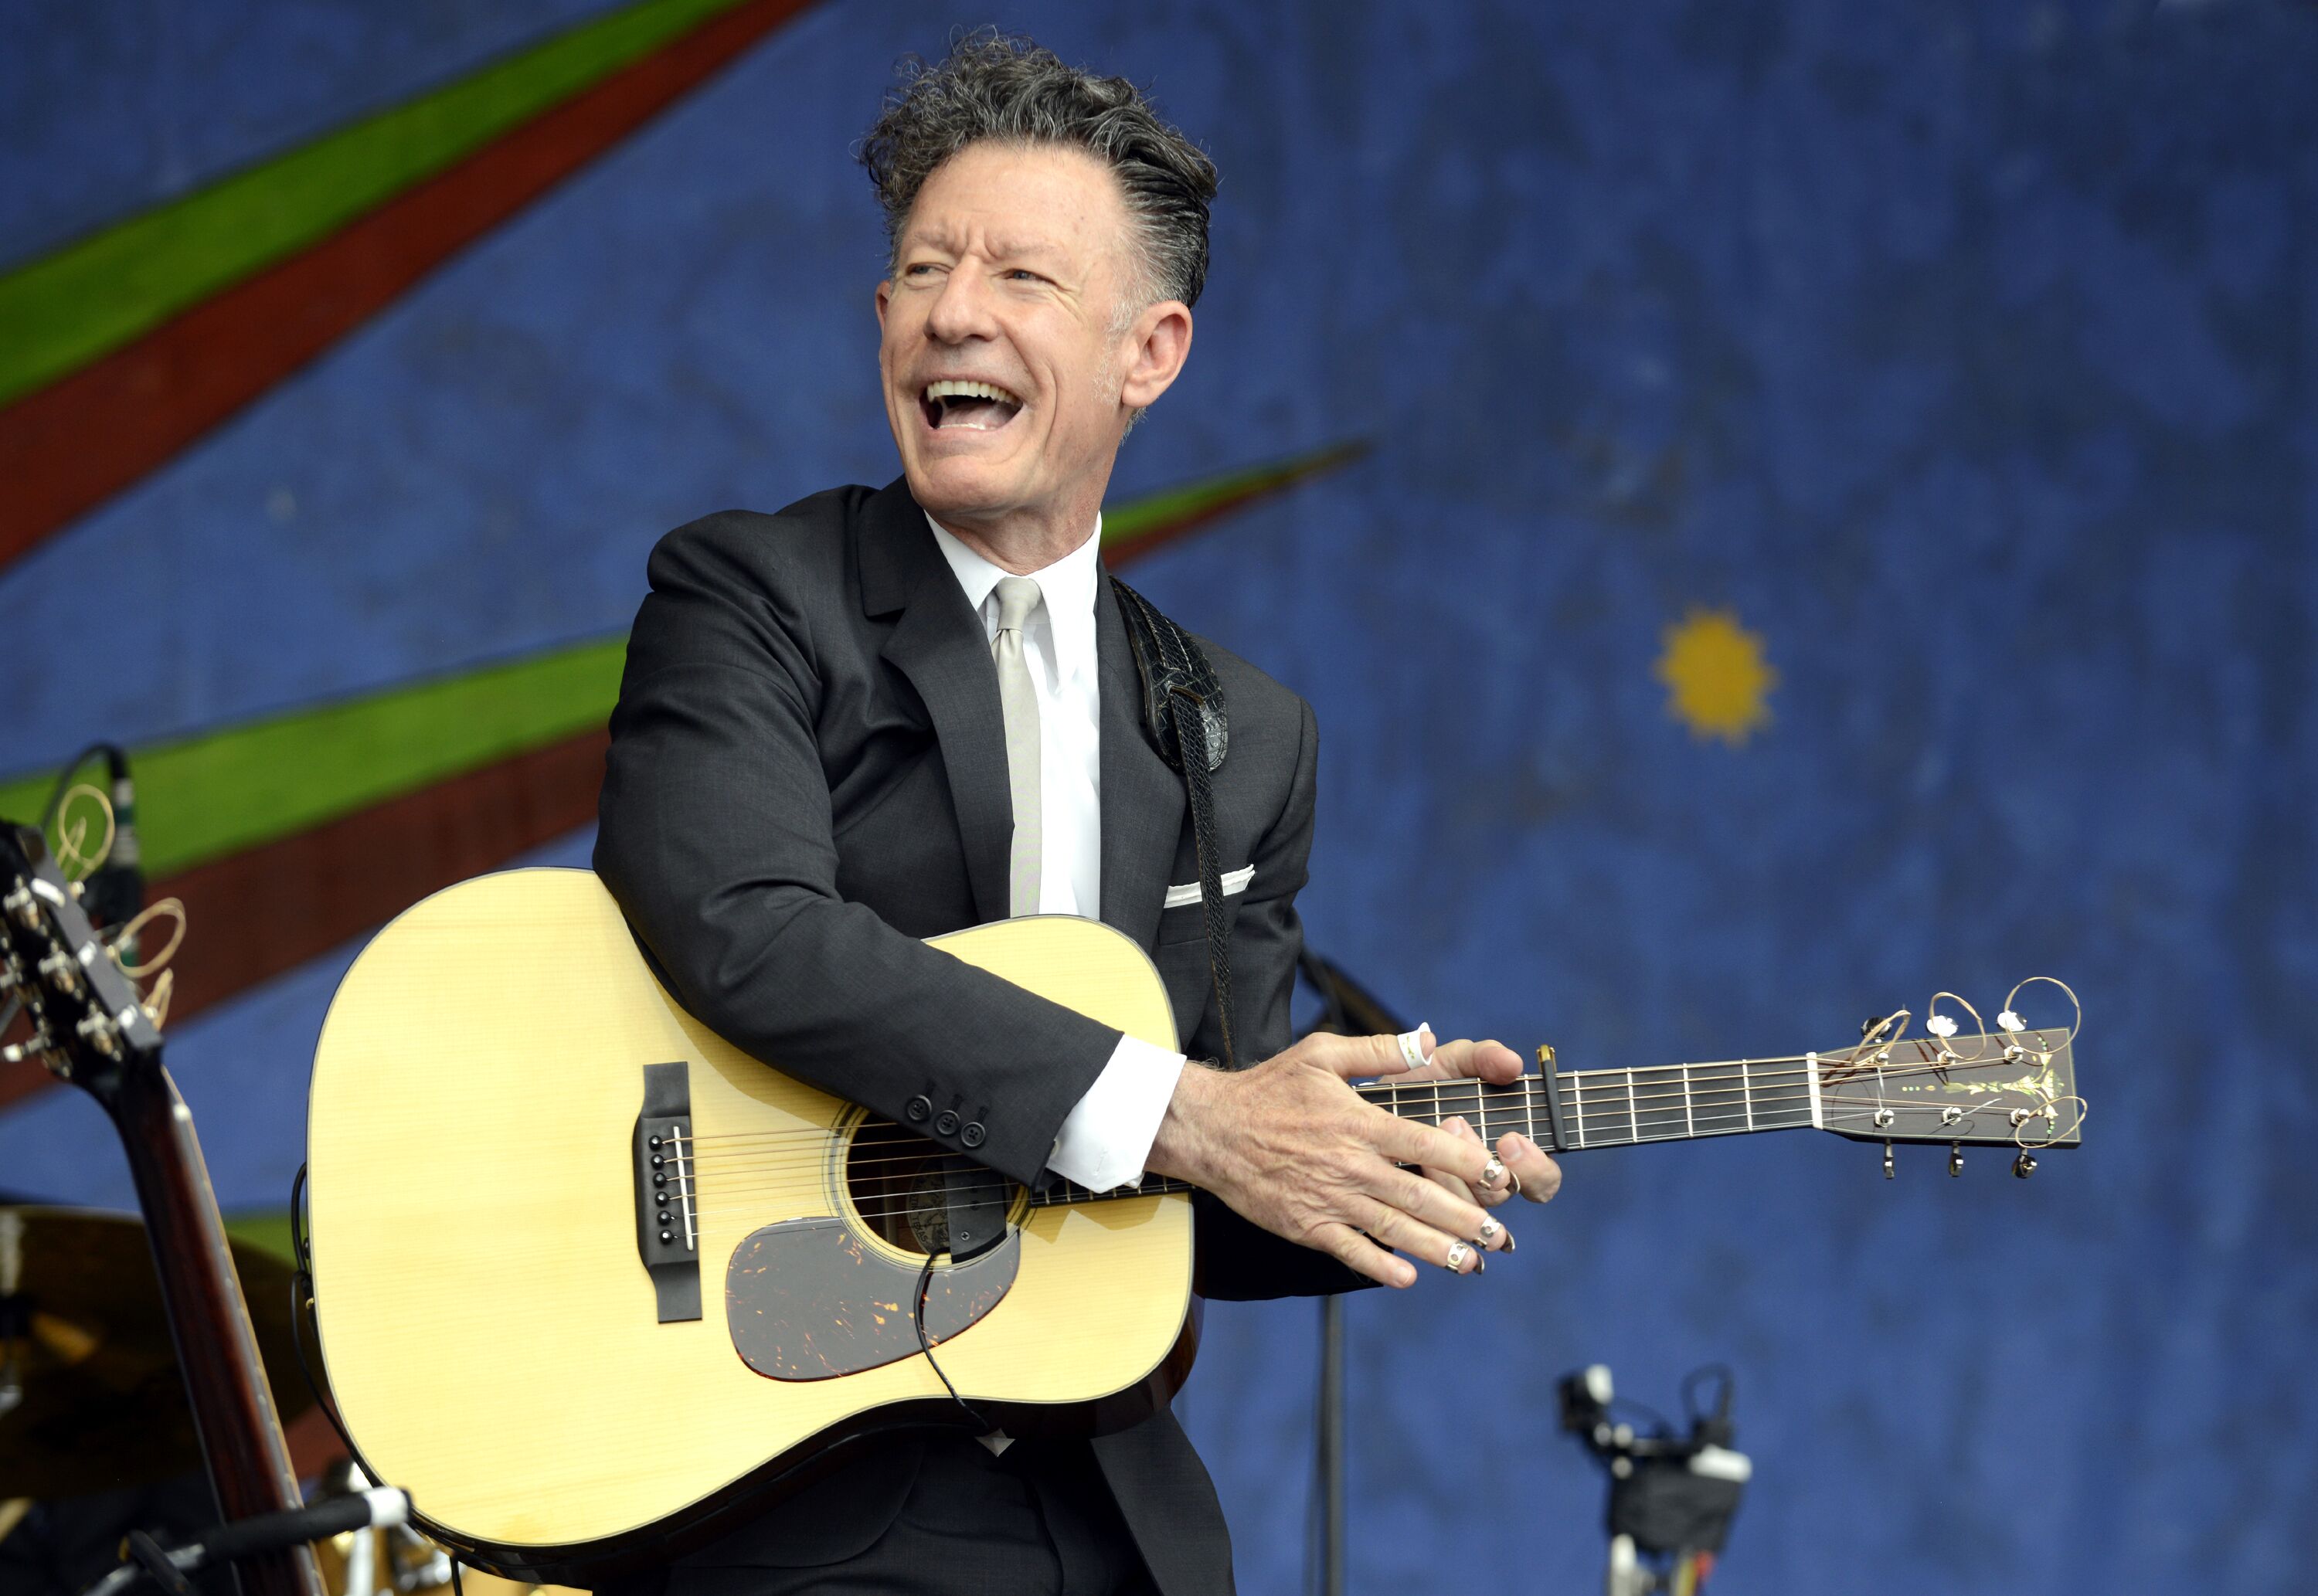 Lyle Lovett performs during Day 4 of the 2014 New Orleans Jazz & Heritage Festival at Fair Grounds Race Course on May 1, 2014 in New Orleans, Louisiana. | Source: Getty Images